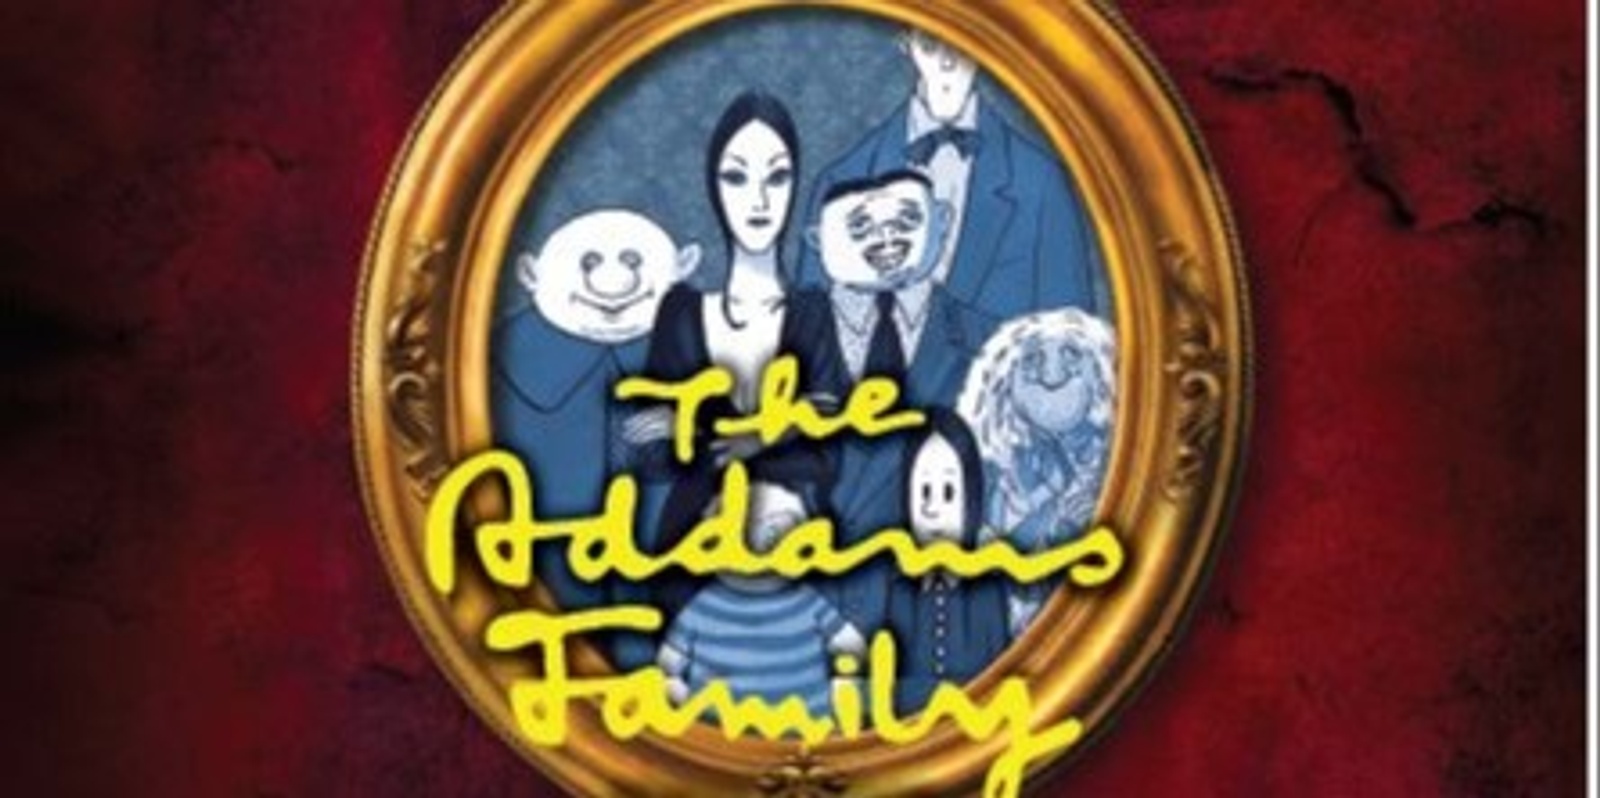 Banner image for The Addams Family